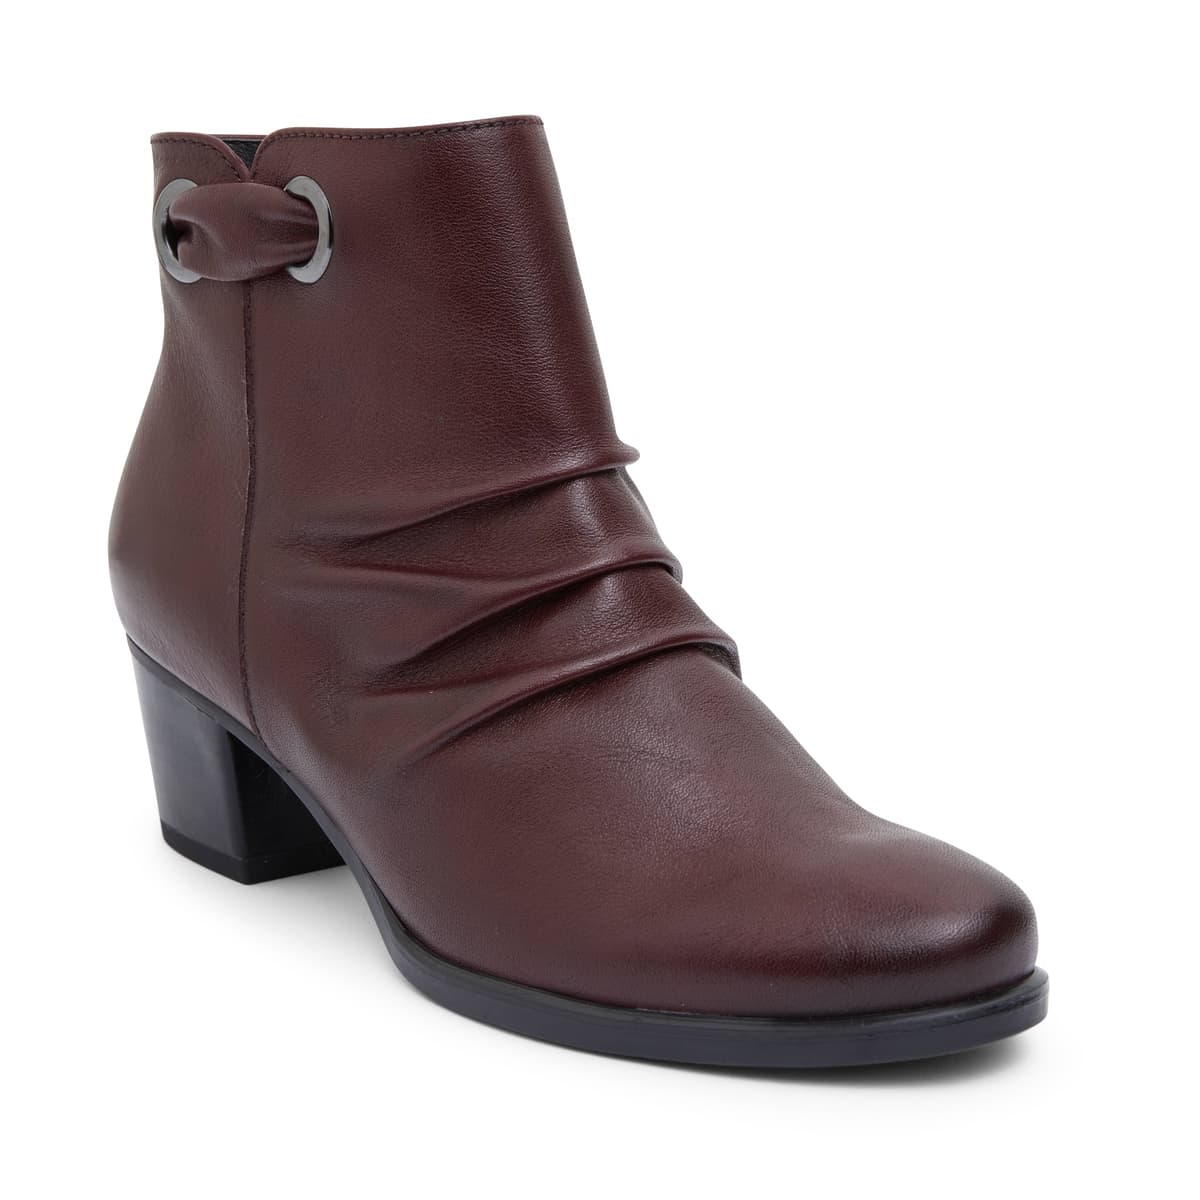 Cagney Boot in Burgundy Leather